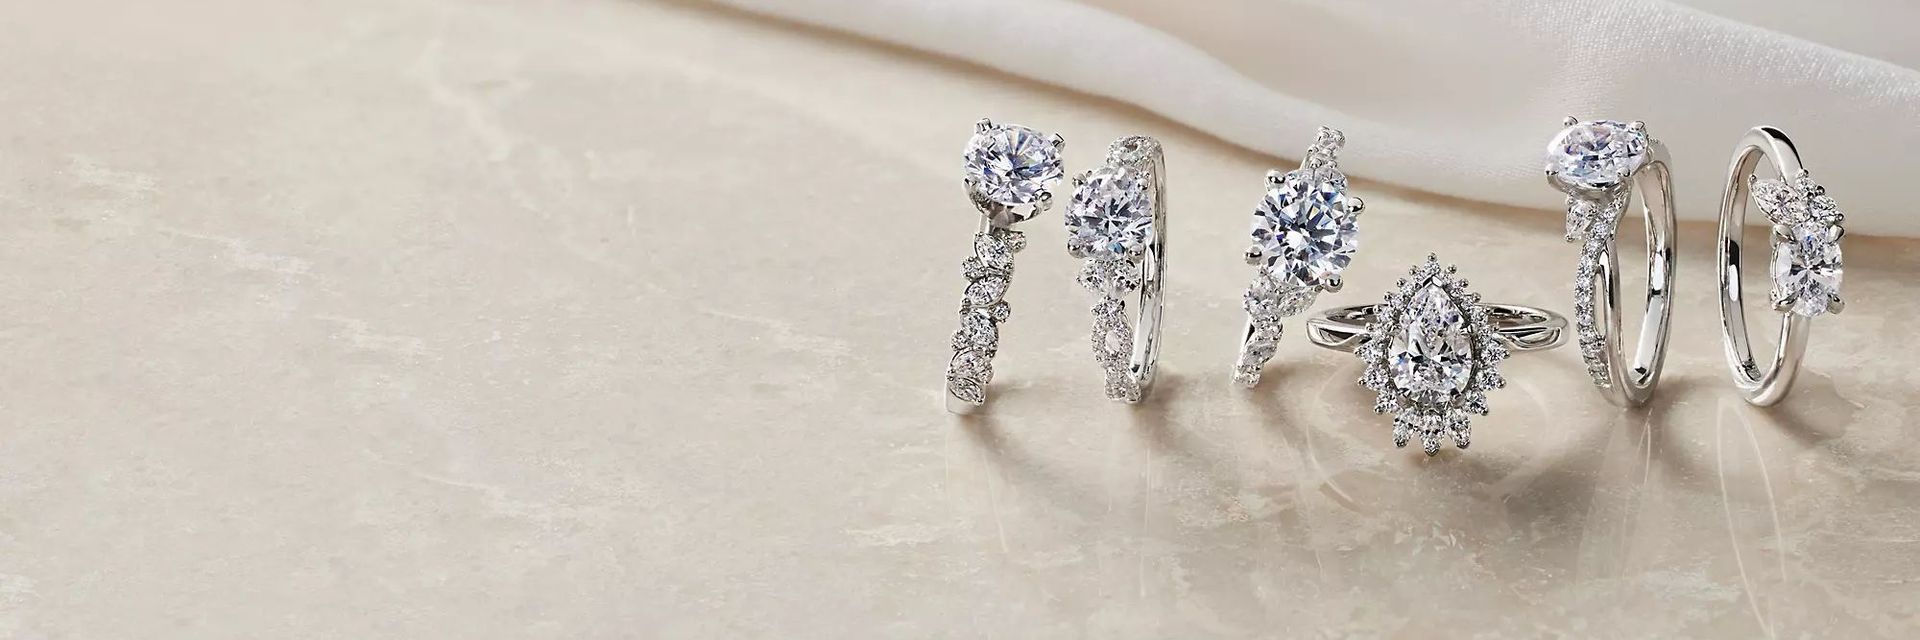 Design your own engagement ring online | Quality Diamonds